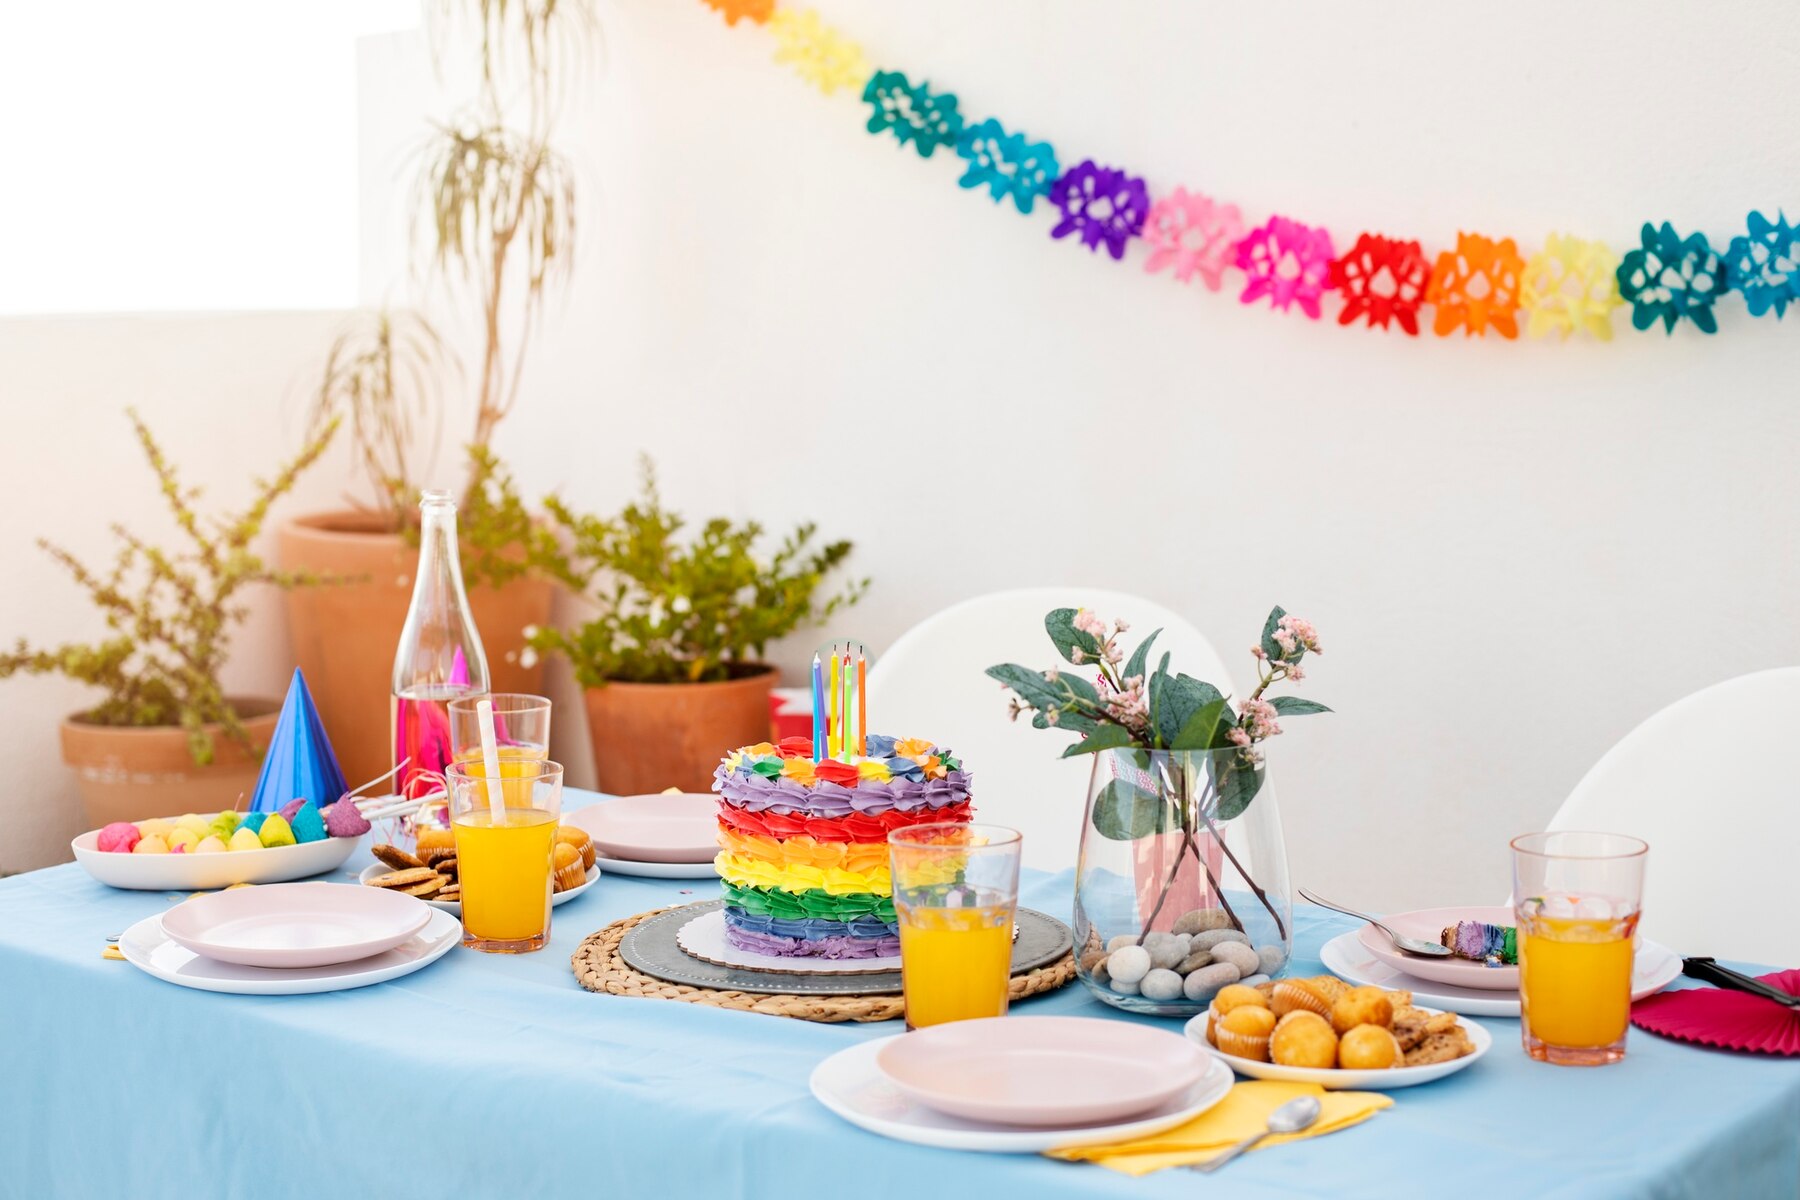 Happy Decoration Ideas For 75th Birthday At Home For Everyone